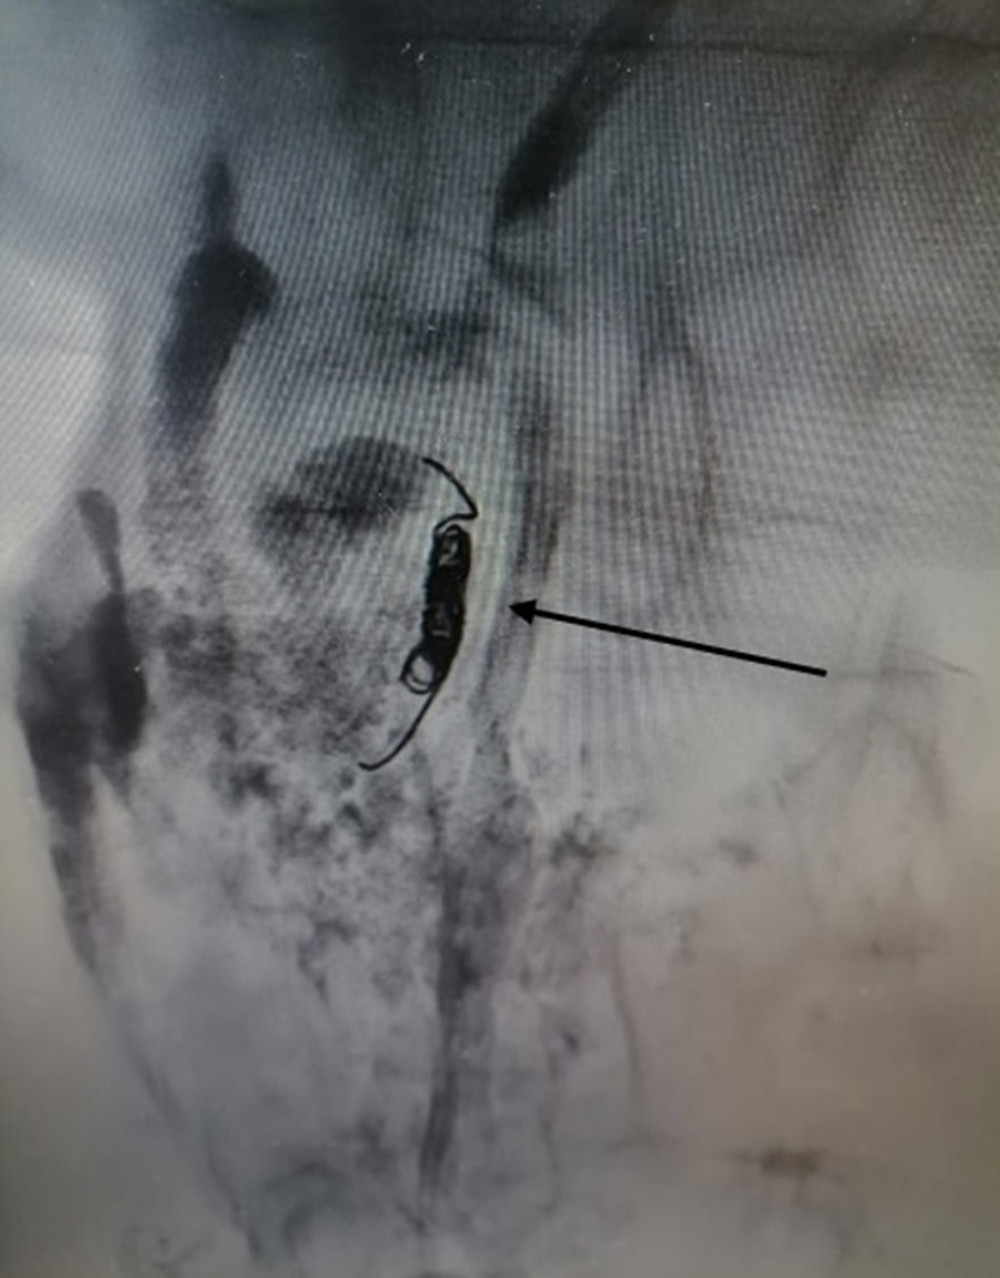 Lymphoscintigraphy images after thoracic duct embolization with 4-mm metallic spiral and glue (arrow) to obtain complete thoracic duct closure.